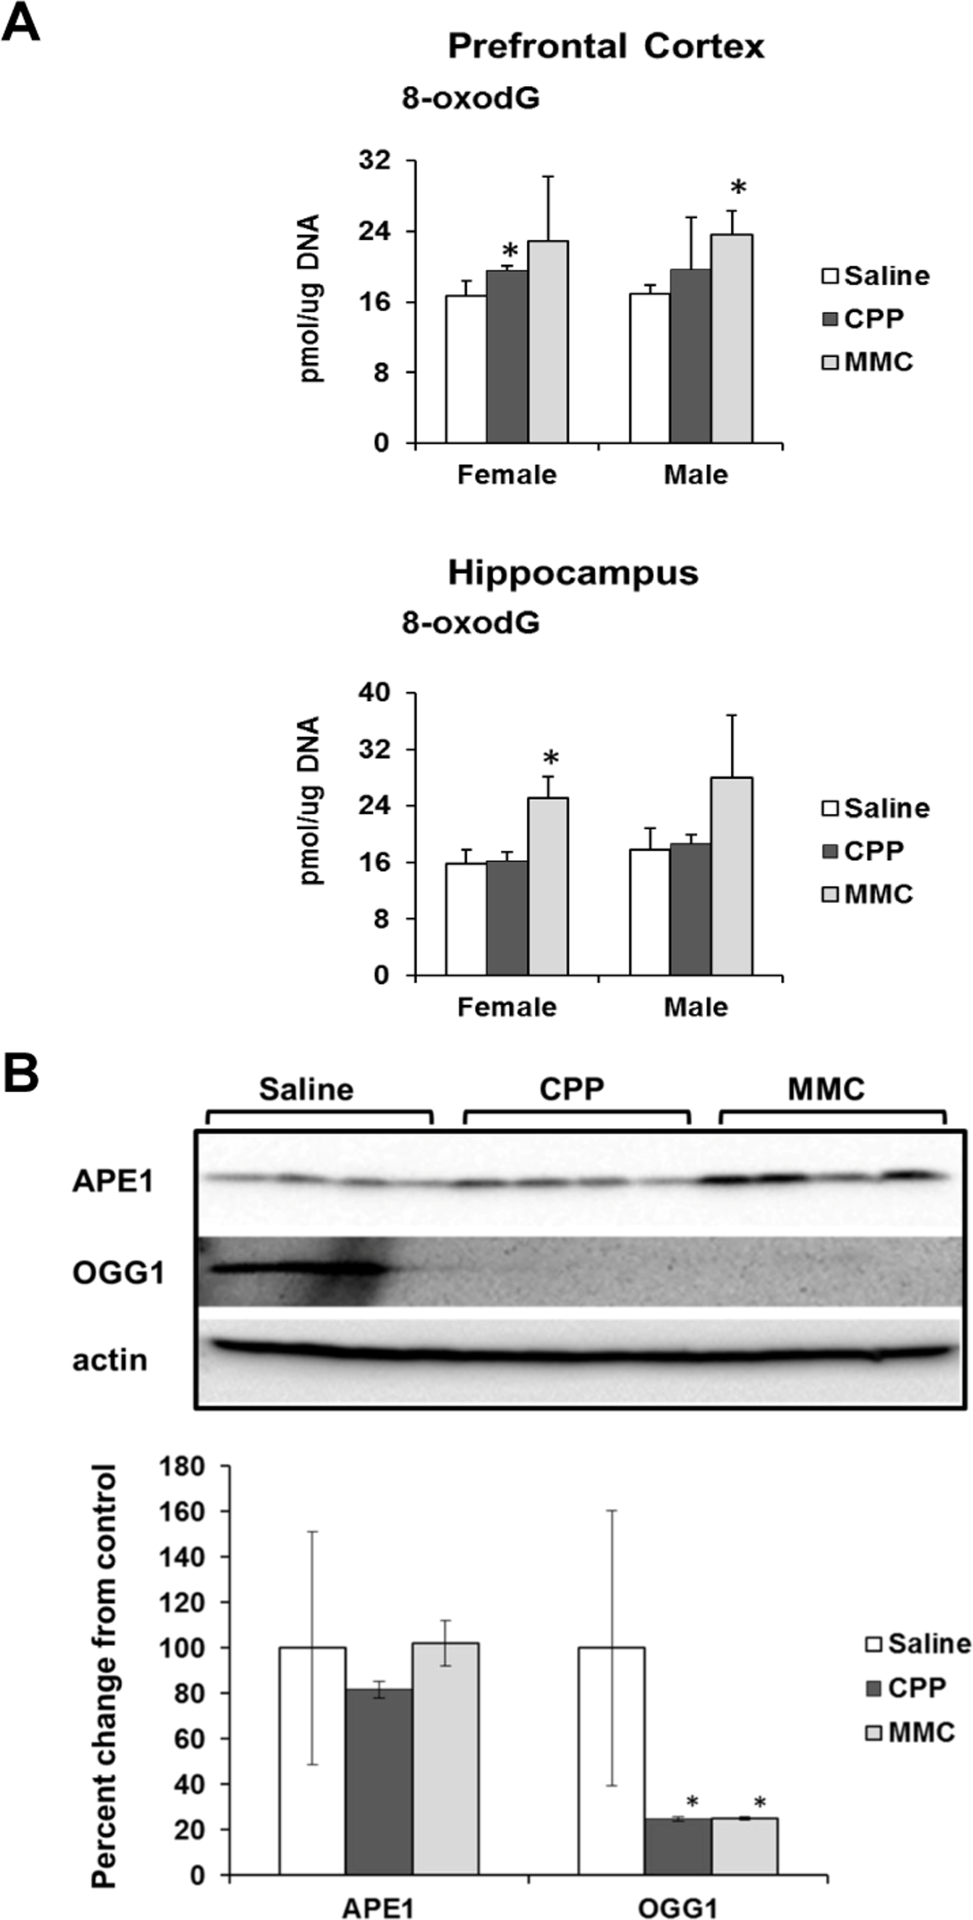 Oxidative DNA damage in the PFC and hippocampus tissues of chemotherapy-exposed animals